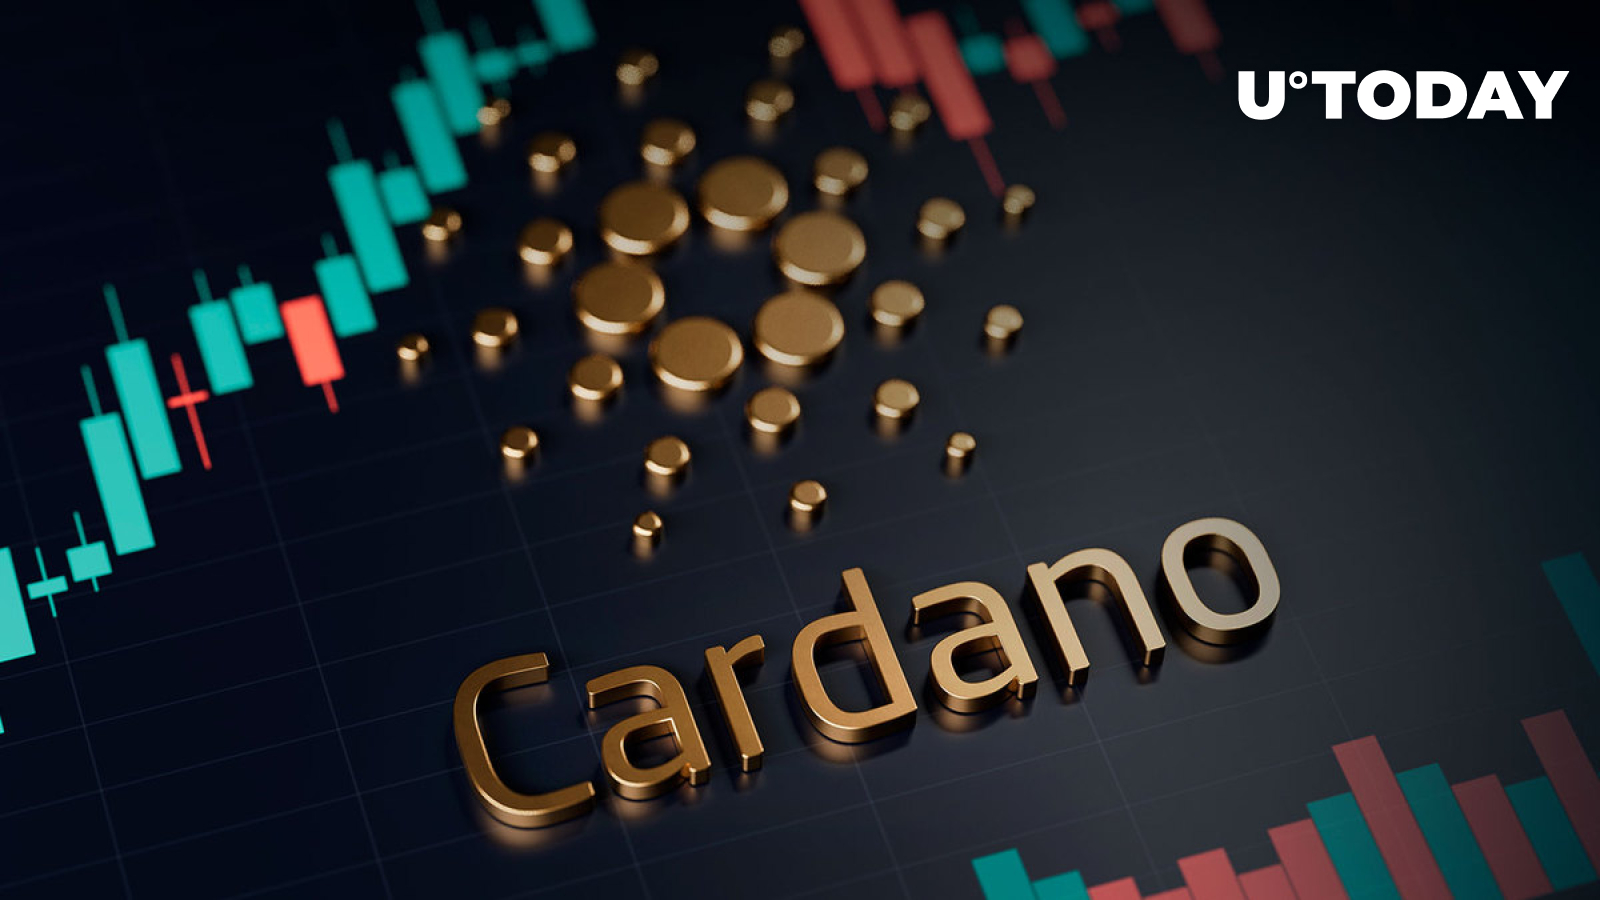 Cardano Developer Community Reaches New Growth Levels: Details